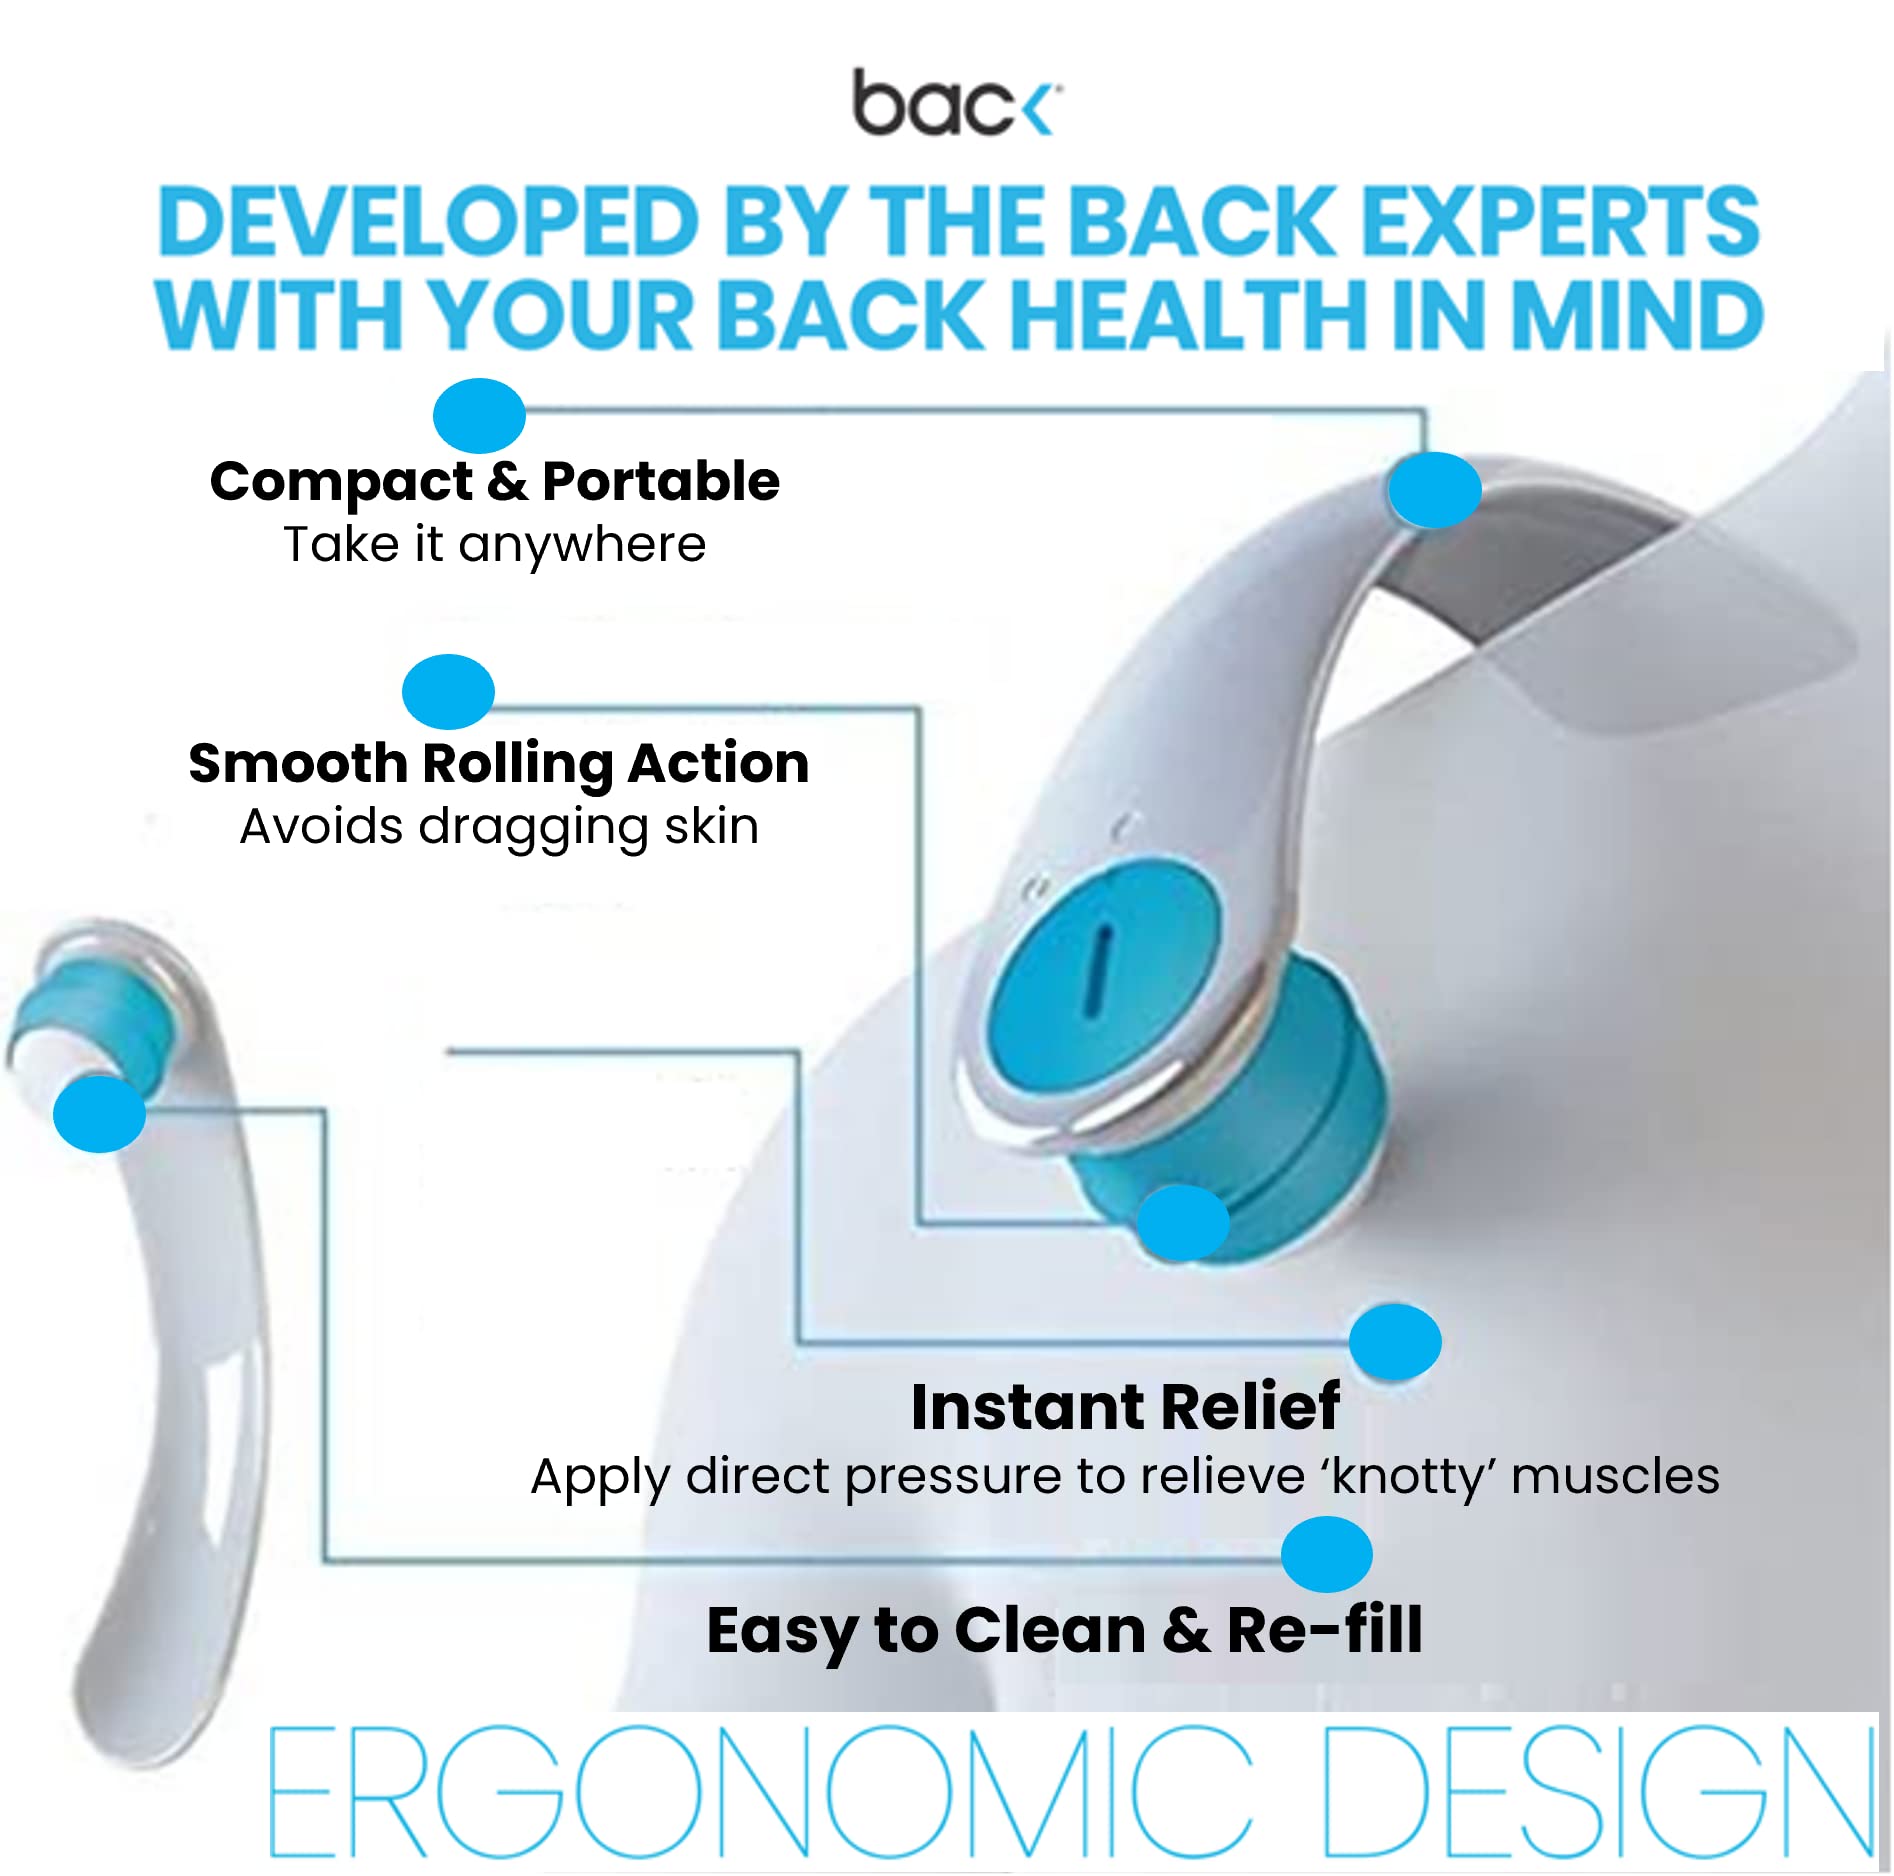 Back Easy Lotion Applicator for applying Your Favorite Topical Gel or Cream to Hard to Reach Places. Easy to use & Refill!